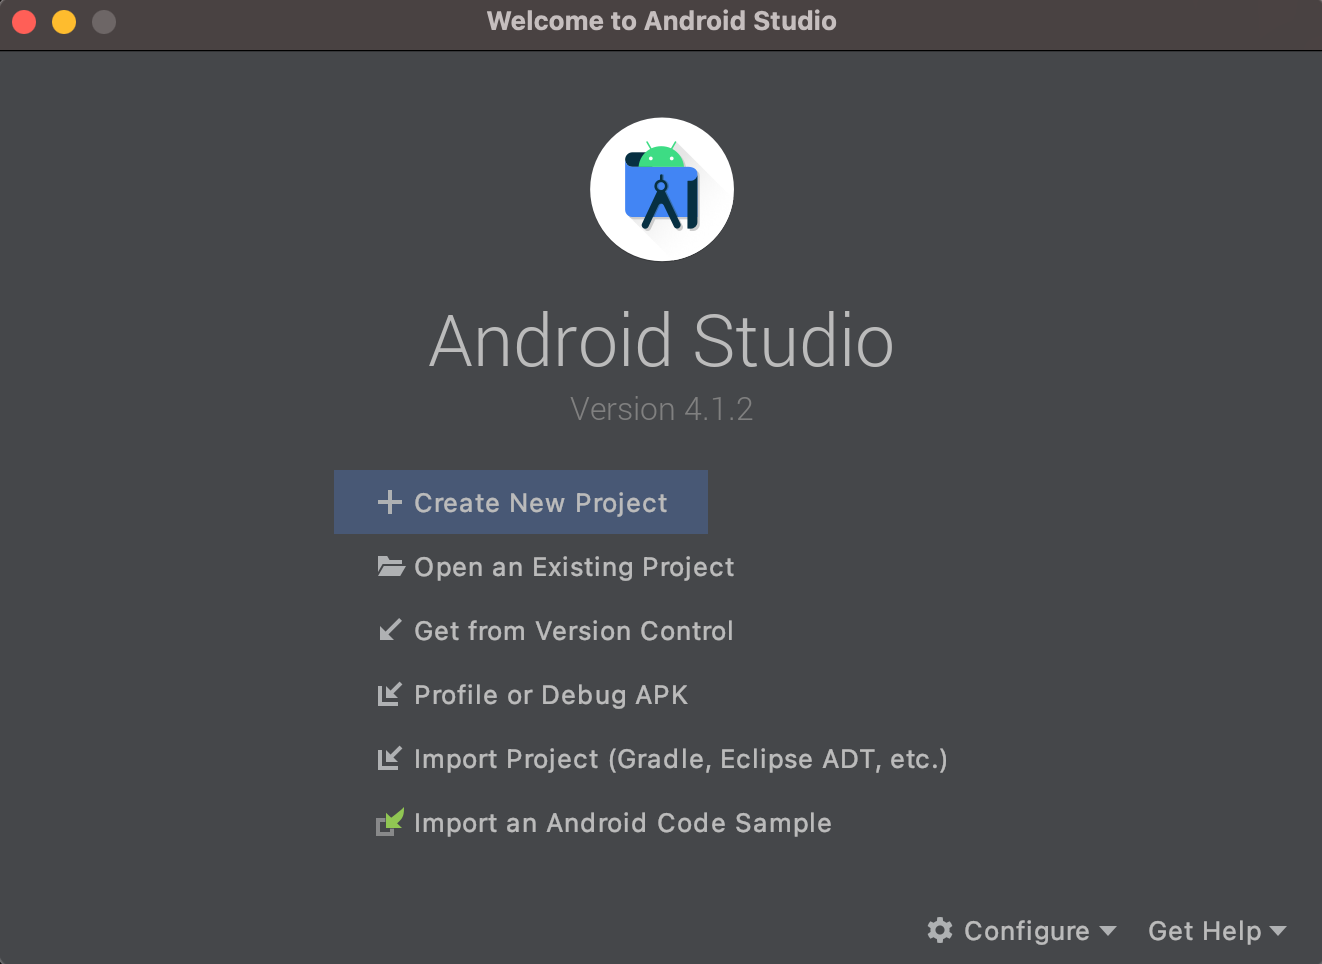 android_studio_welcome.png